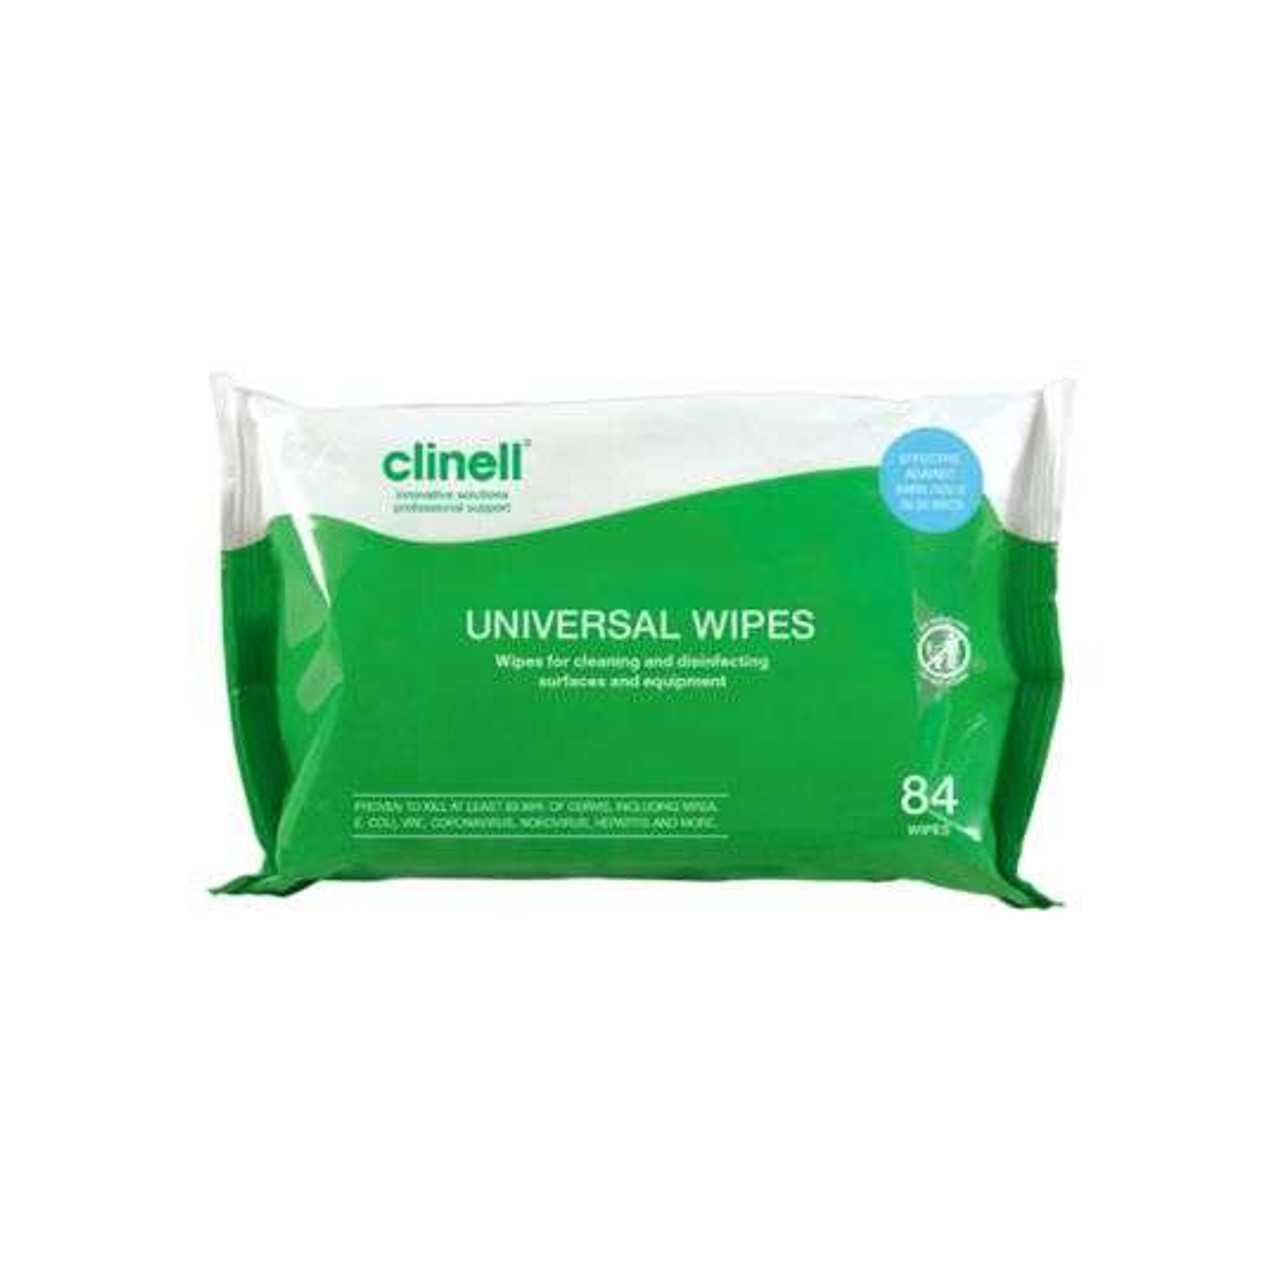 Clinell Universal Cleaning Wipes Pack of 84 RRP £2.49 CLEARANCE XL £1.50